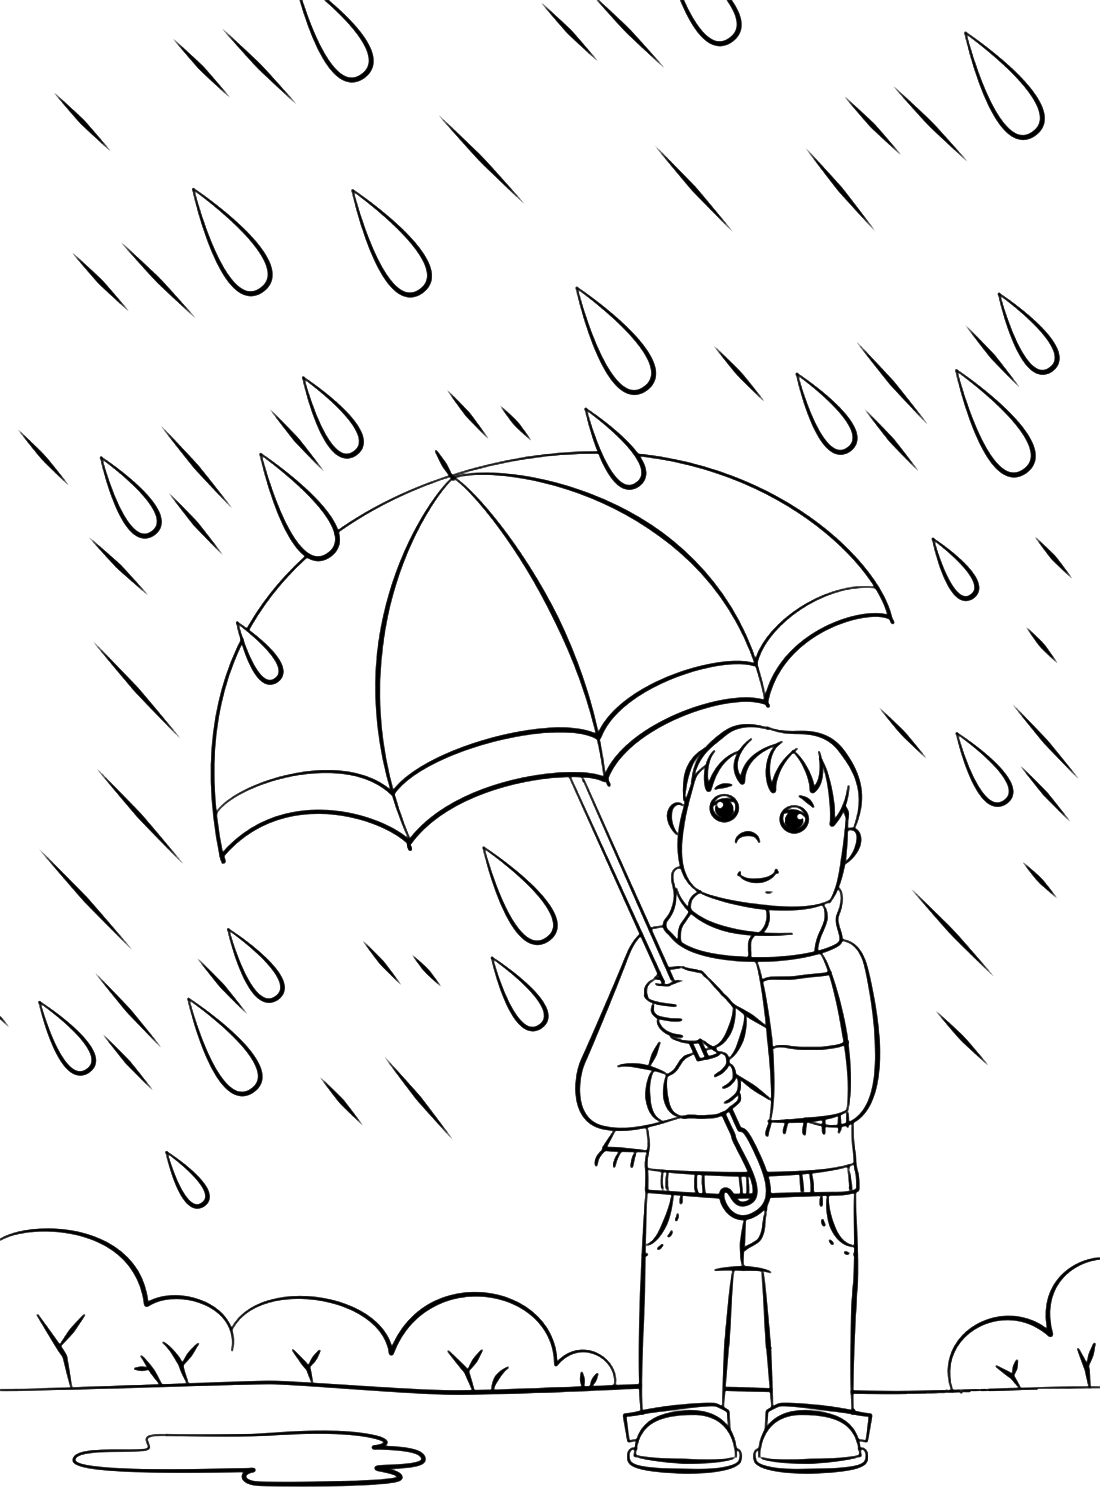 The Boy Is In The Rain Coloring Pages